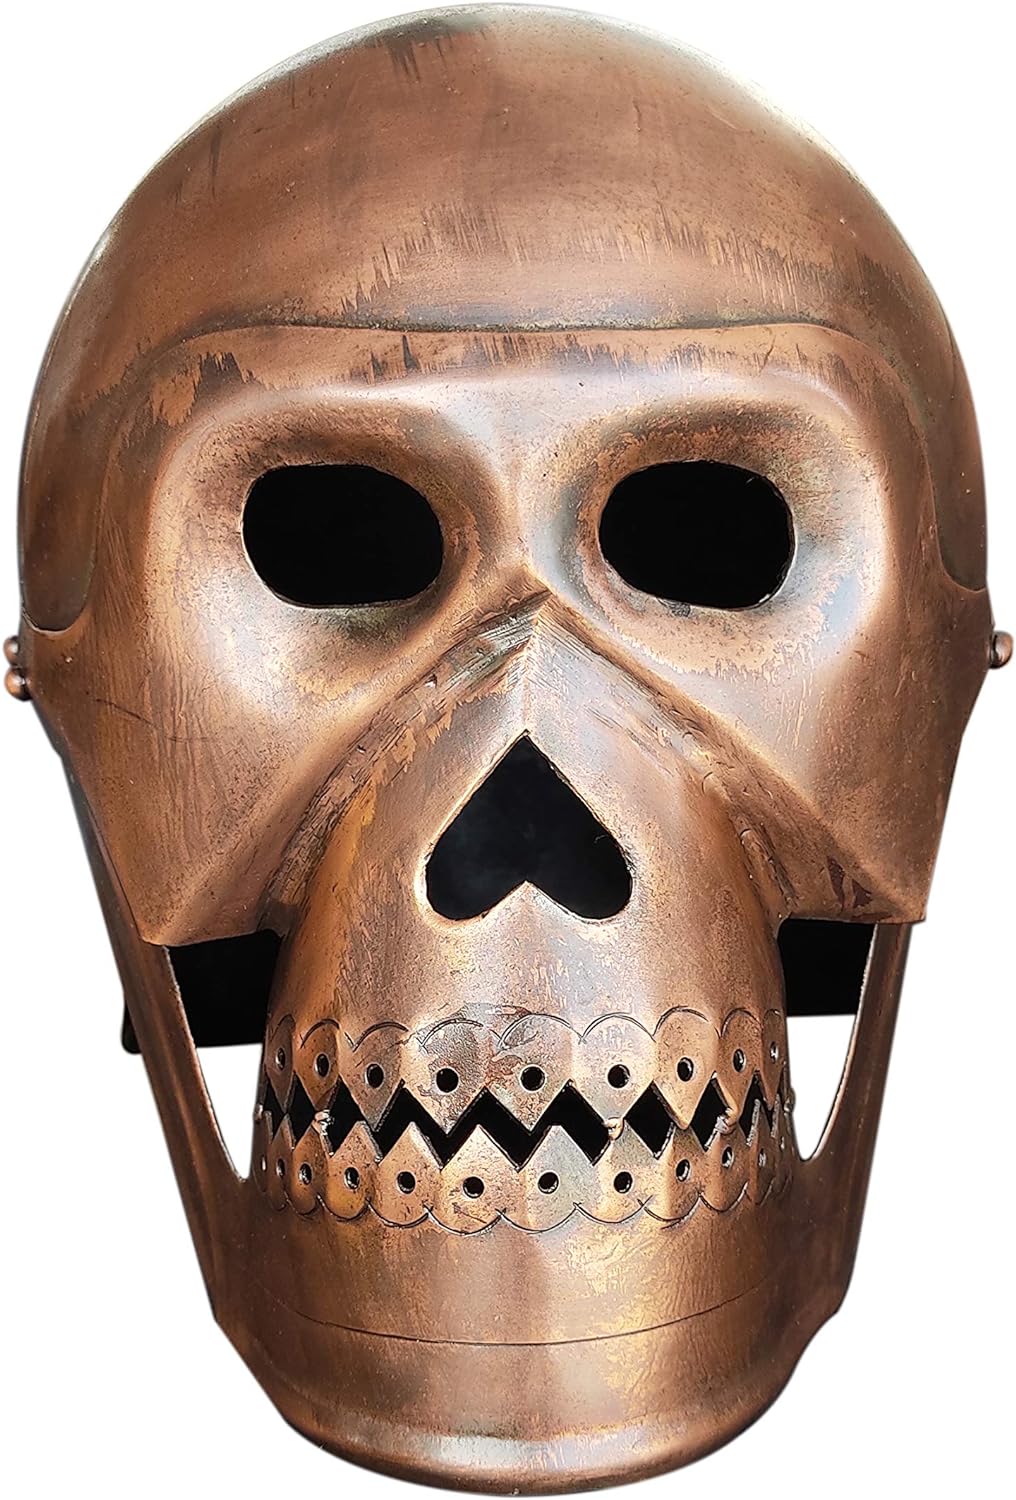 PORTHO Helloween Skeleton Skull Scary Ghost Helmet Full-Face Armour Replica Copper Metal Antique Mask Gift for Roleplay Drama